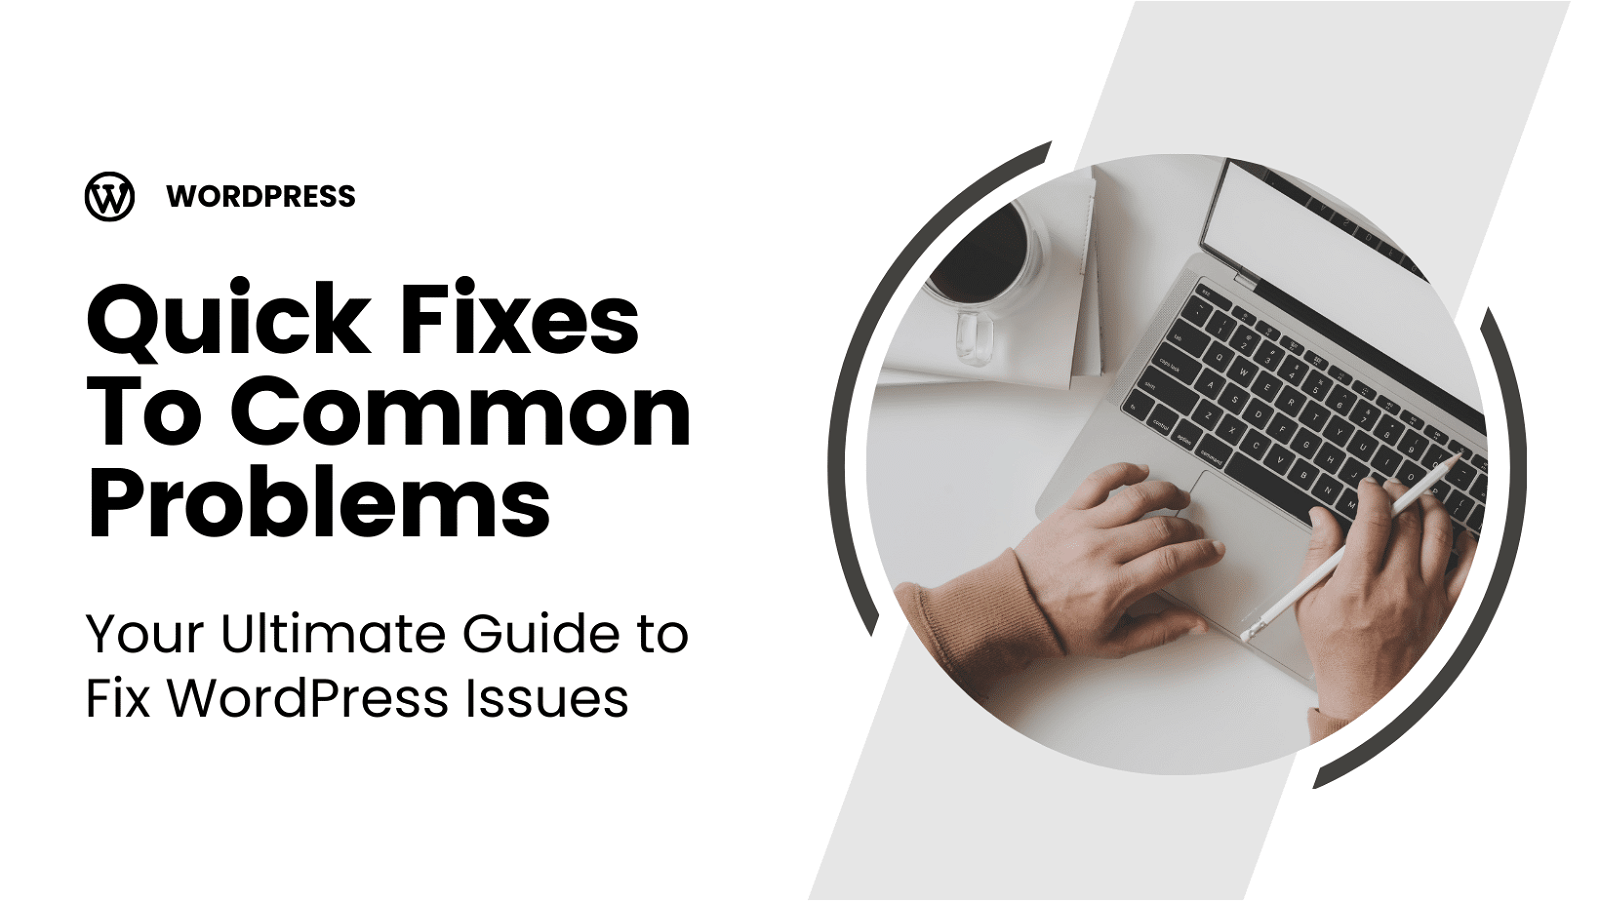 Your ultimate guide to fix WordPress issues - quick fixes to common problems.